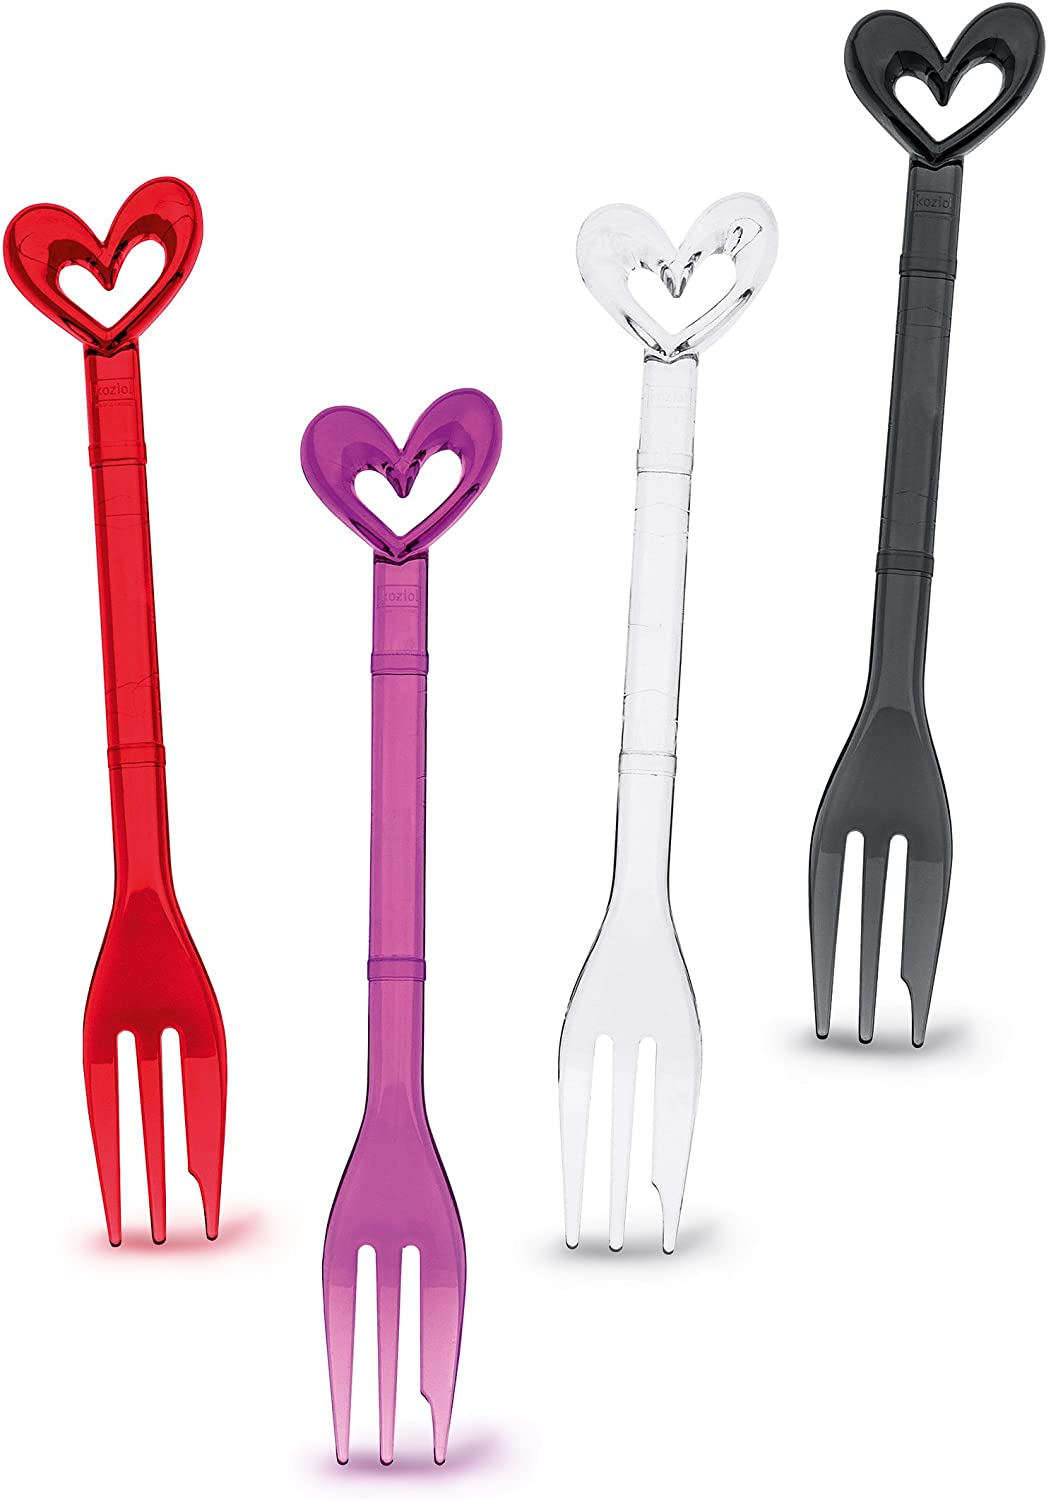 Koziol Cake fork set of 4 tr. Anthracite/Clear/Pink/Red P1/K24